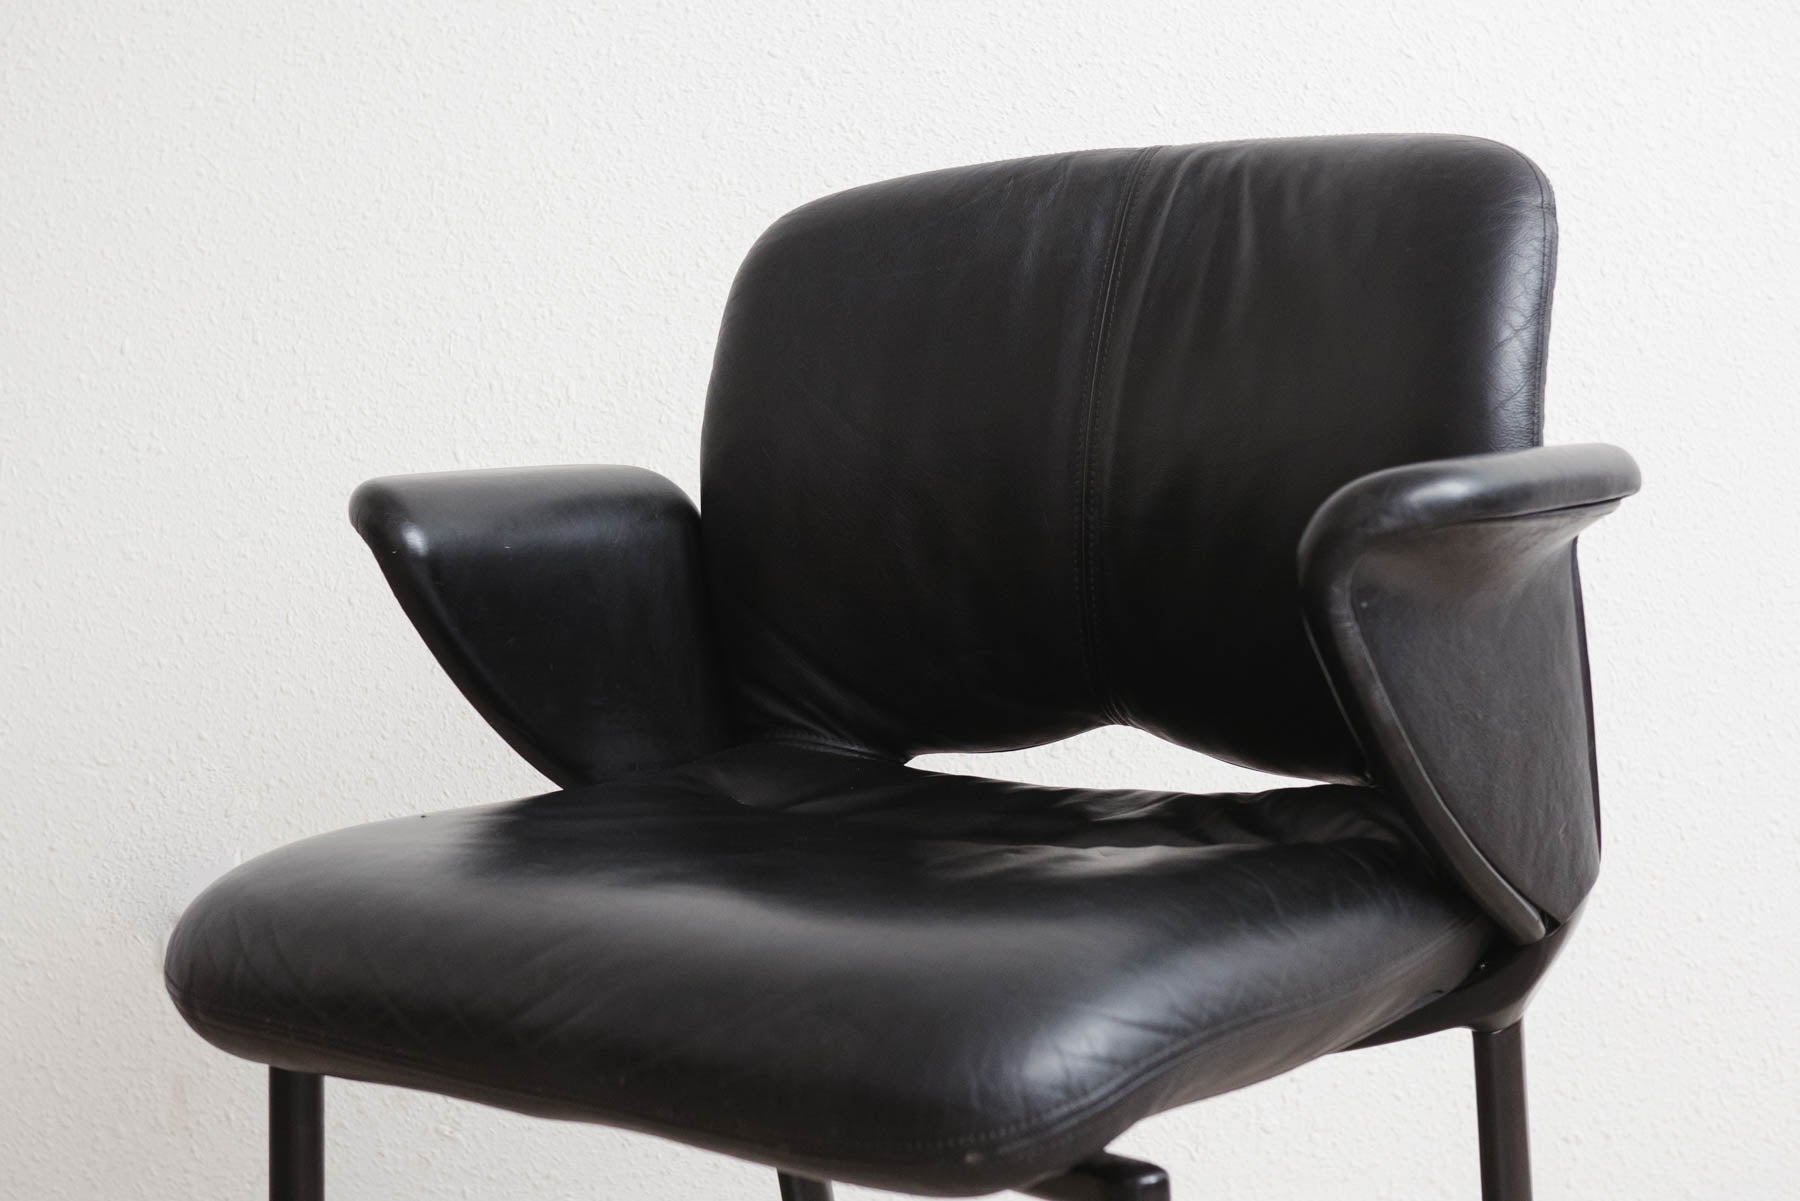 Herman Leather Chair - Homestead Seattle